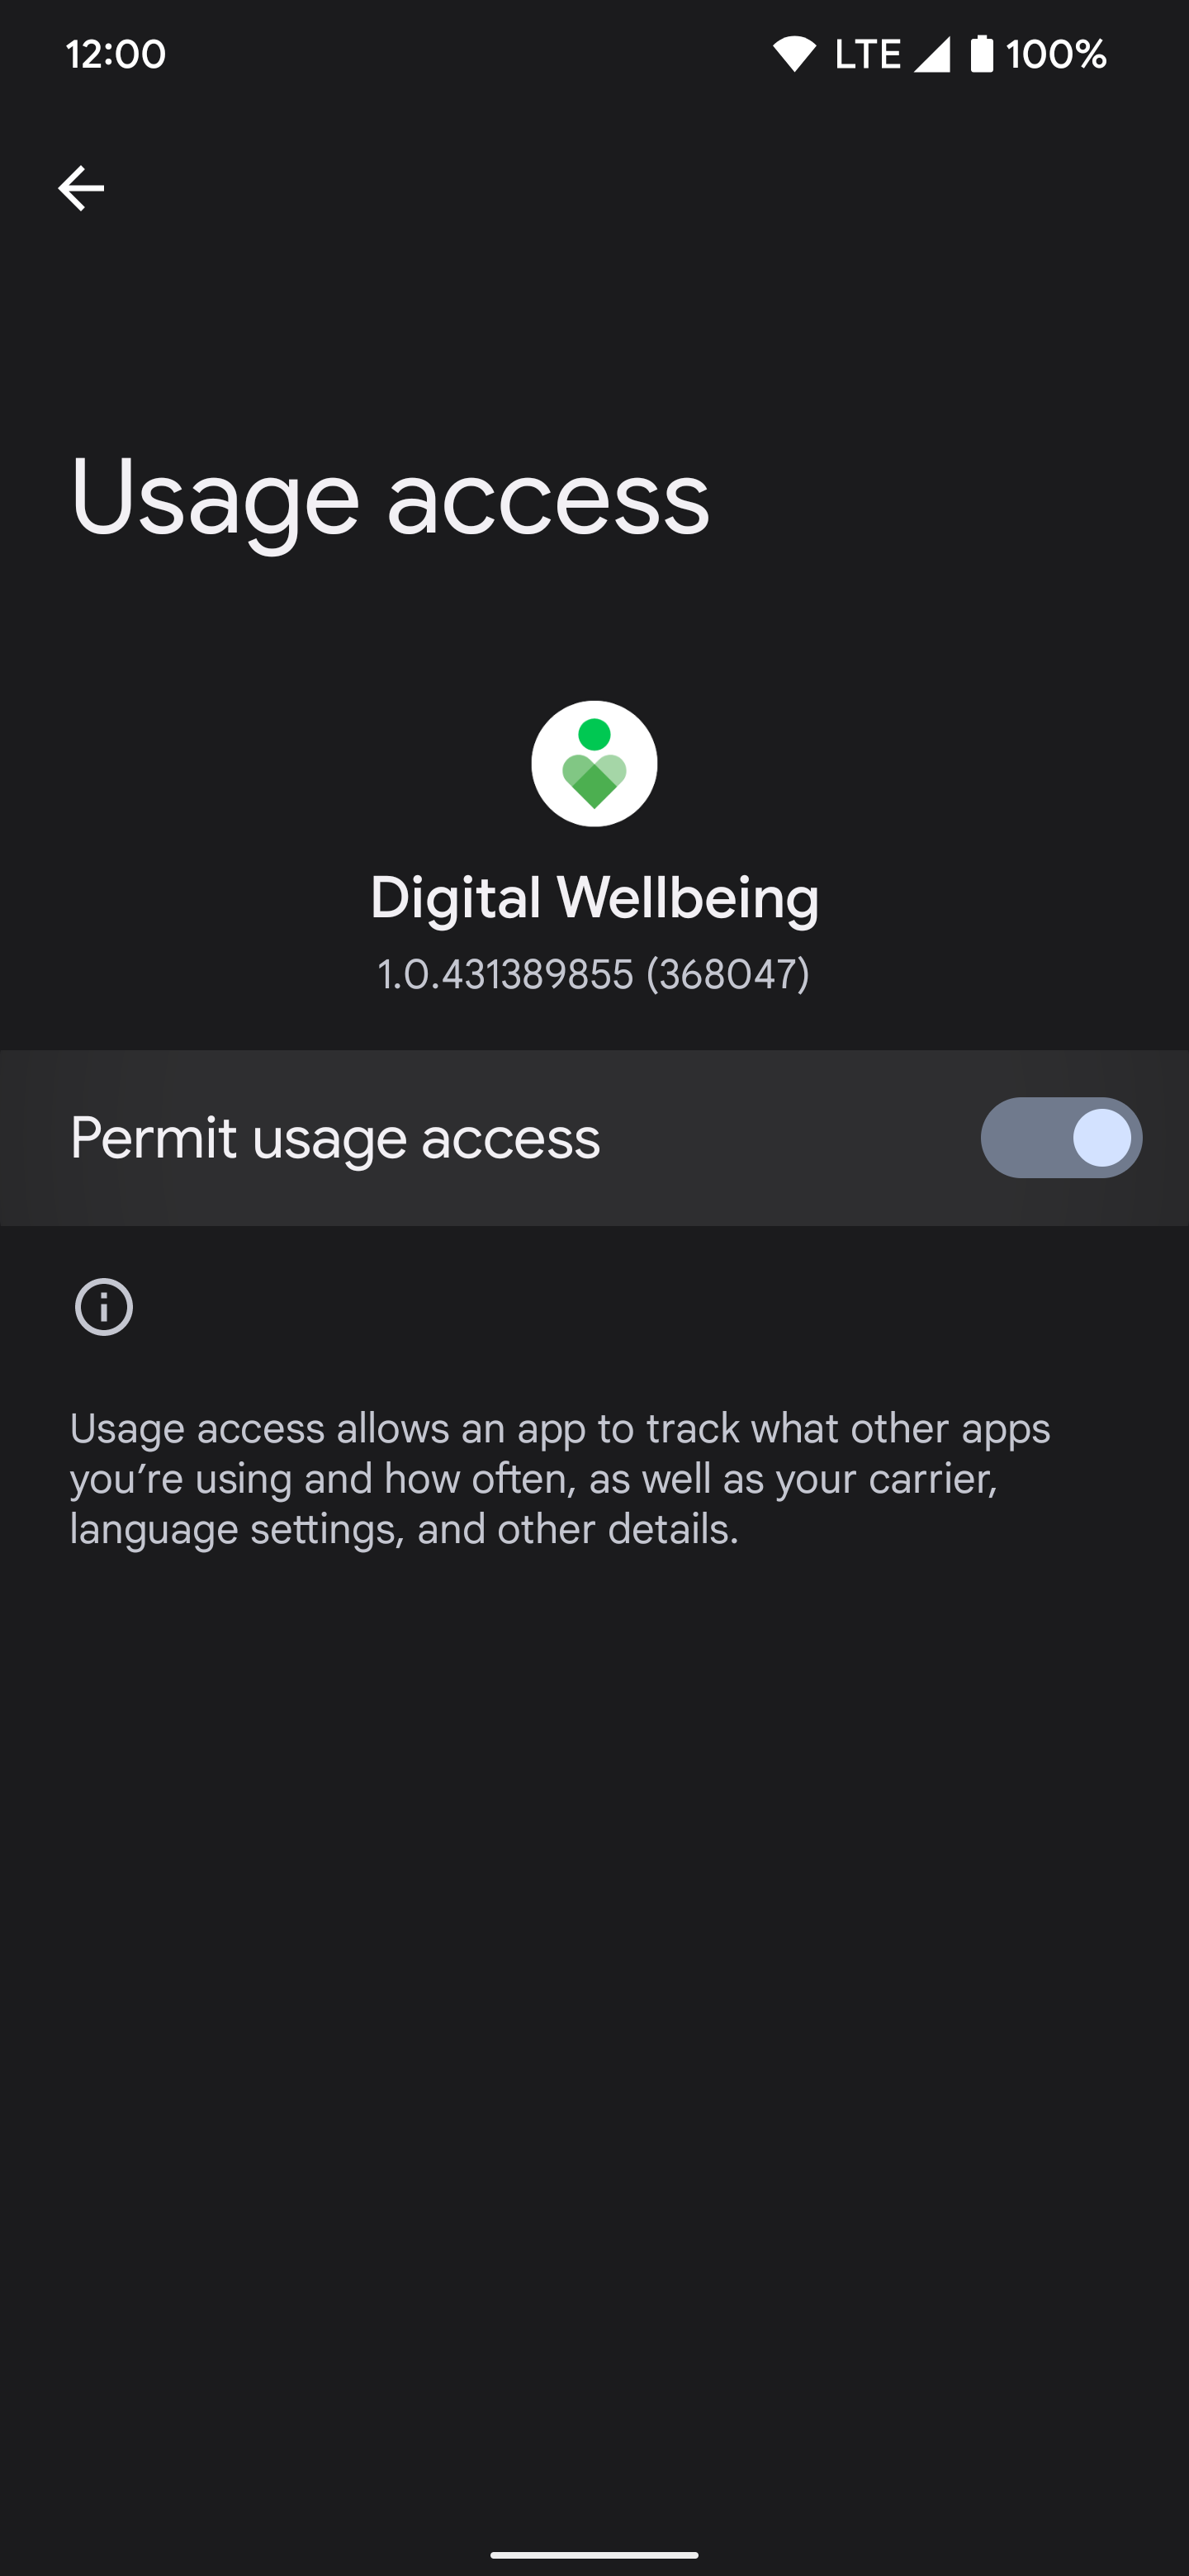 Screenshot shows the Usage access page specifically for Digital Wellbeing, and the 'Permit usage access' option toggled on.